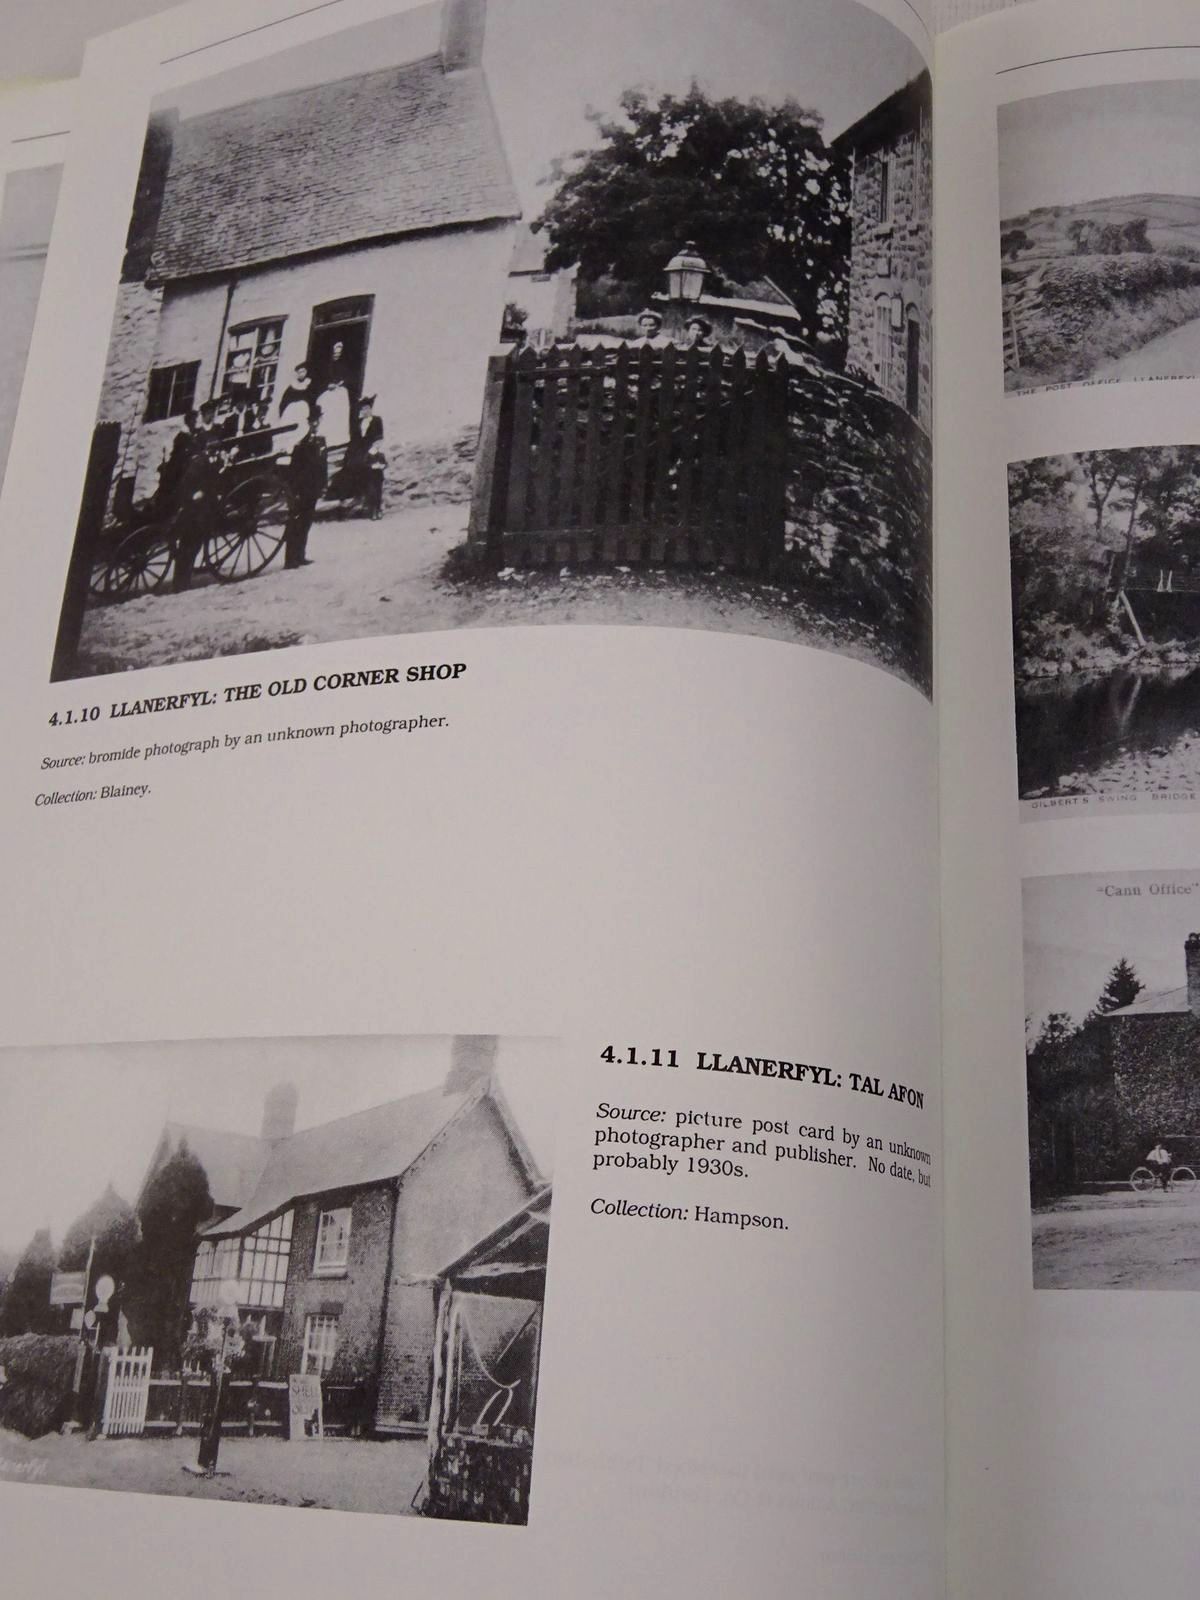 Photo of THE PHOTOGRAPHER IN RURAL WALES written by Pryce, W.T.R. published by The Powysland Club (STOCK CODE: 1817238)  for sale by Stella & Rose's Books